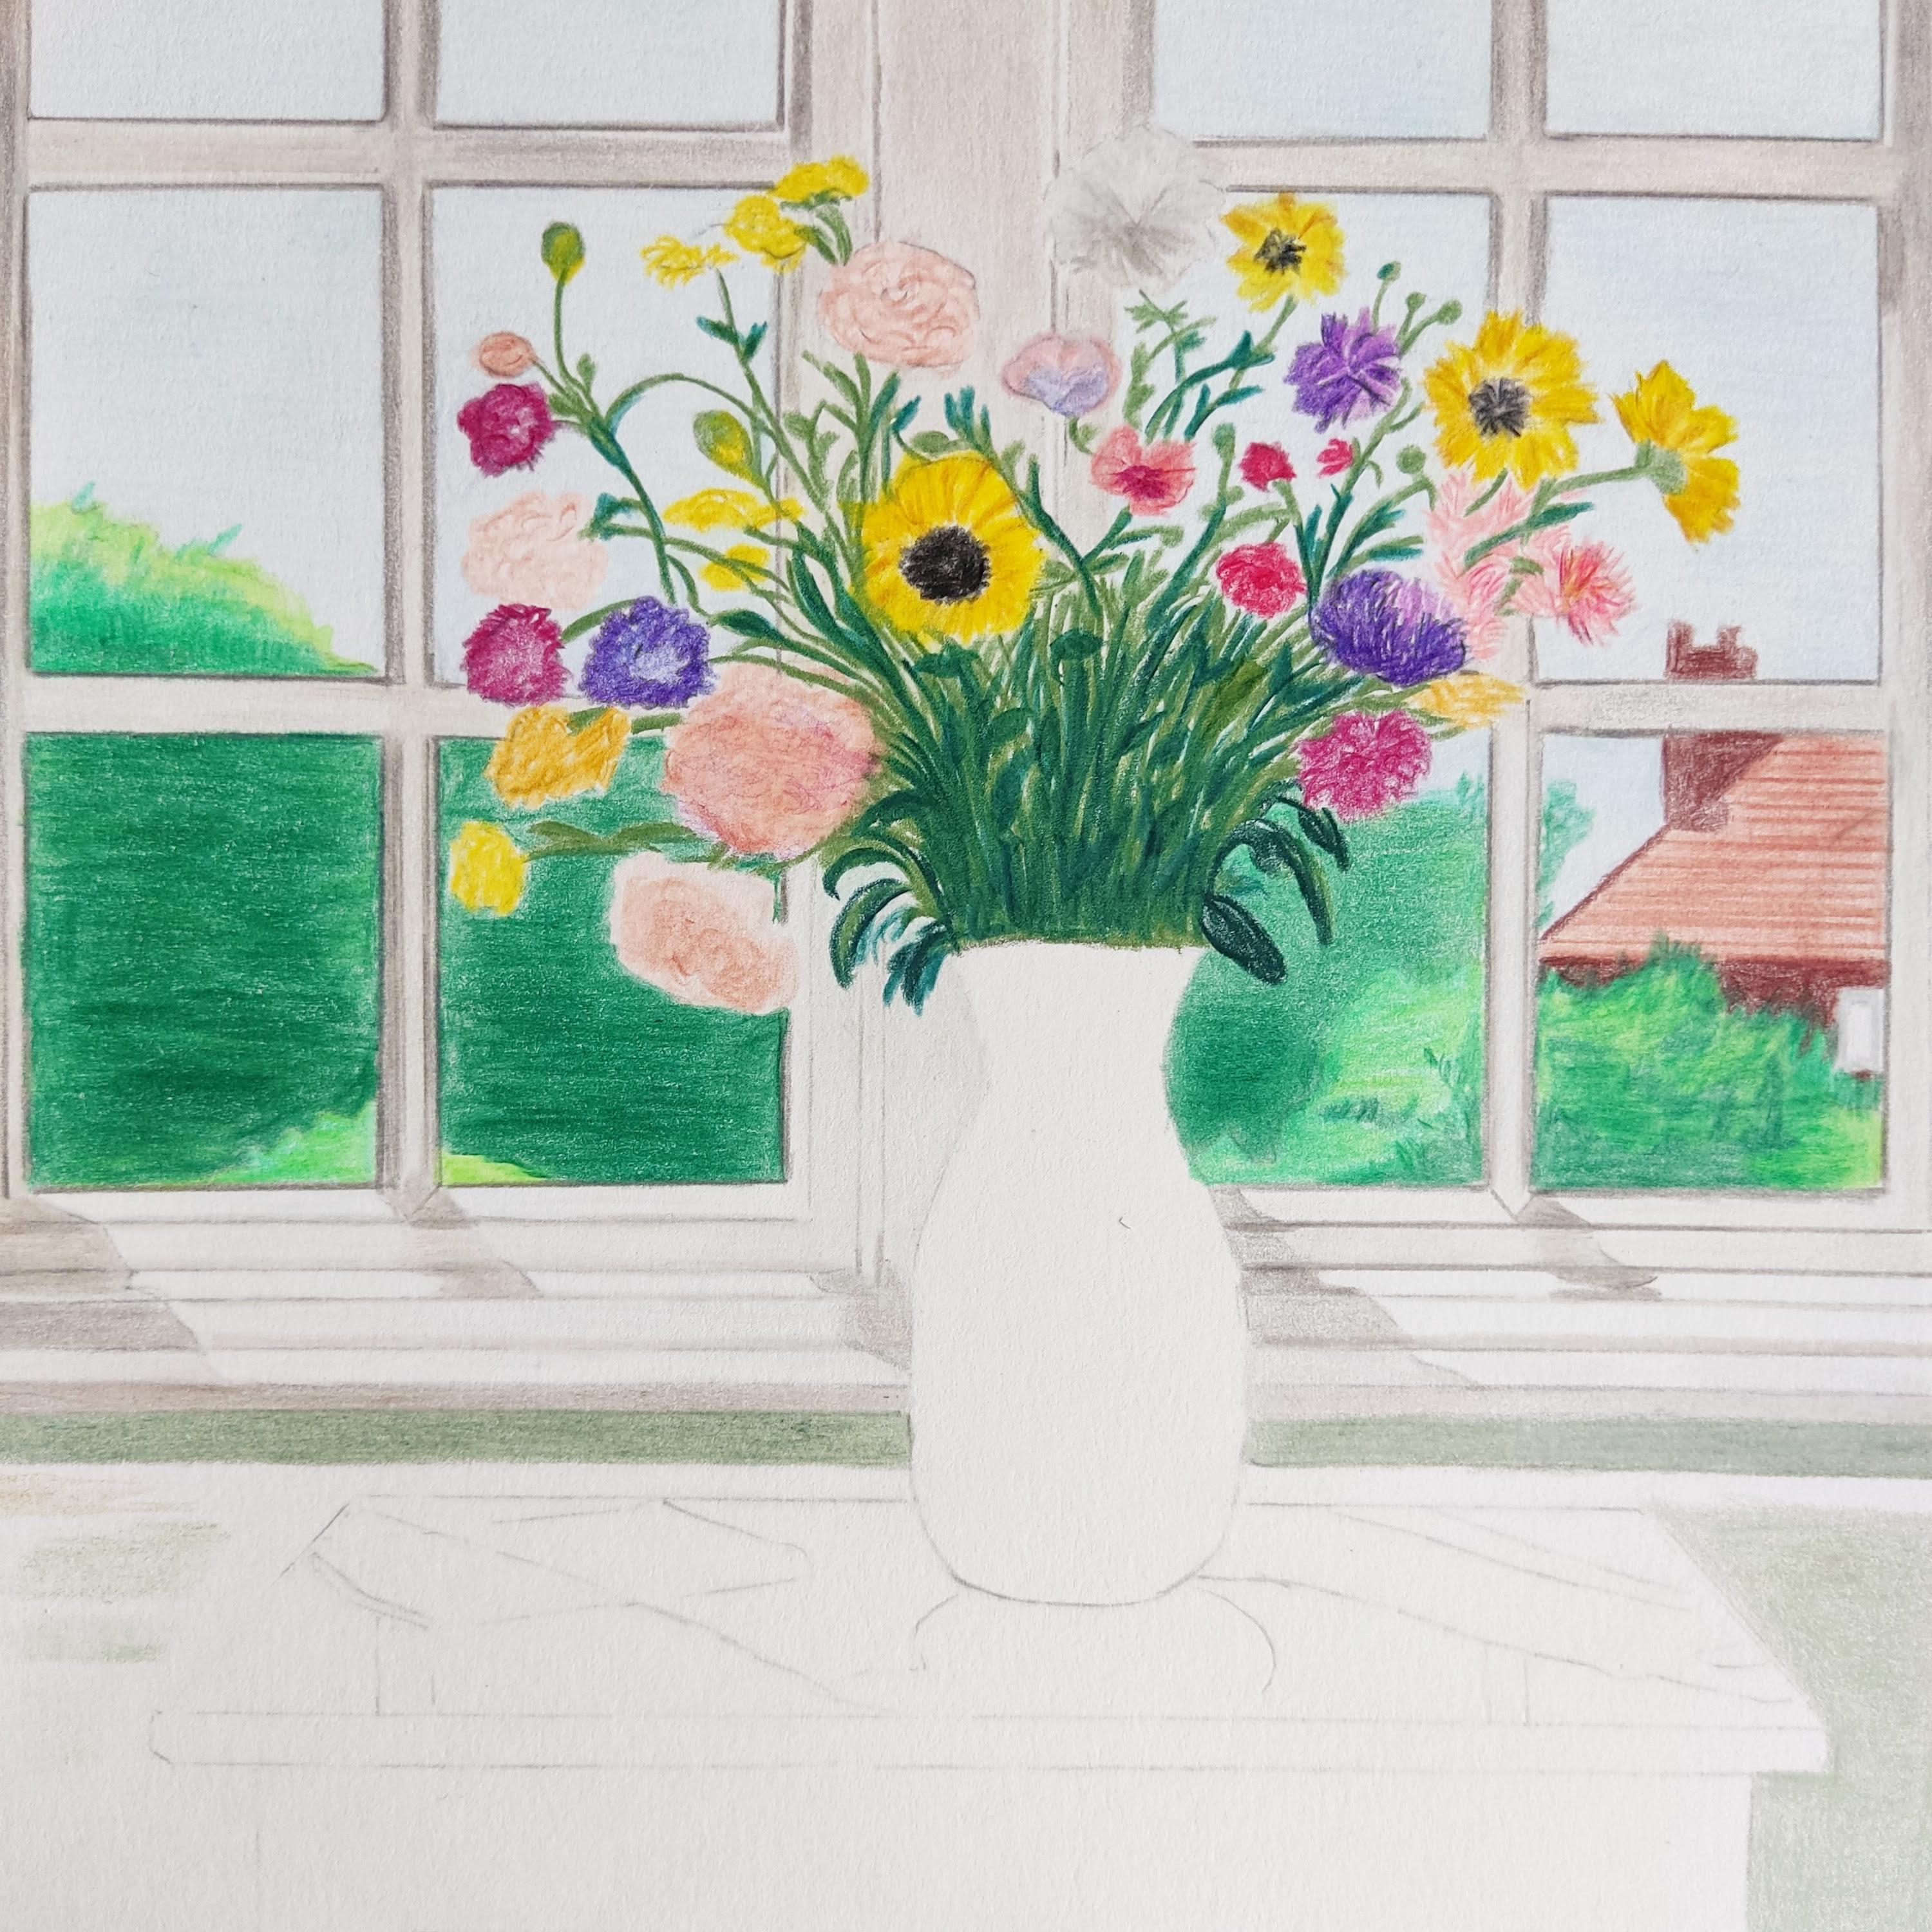 News From a Faraway Land, Original Drawing, Interior Scene, Vase, flowers For Sale 4